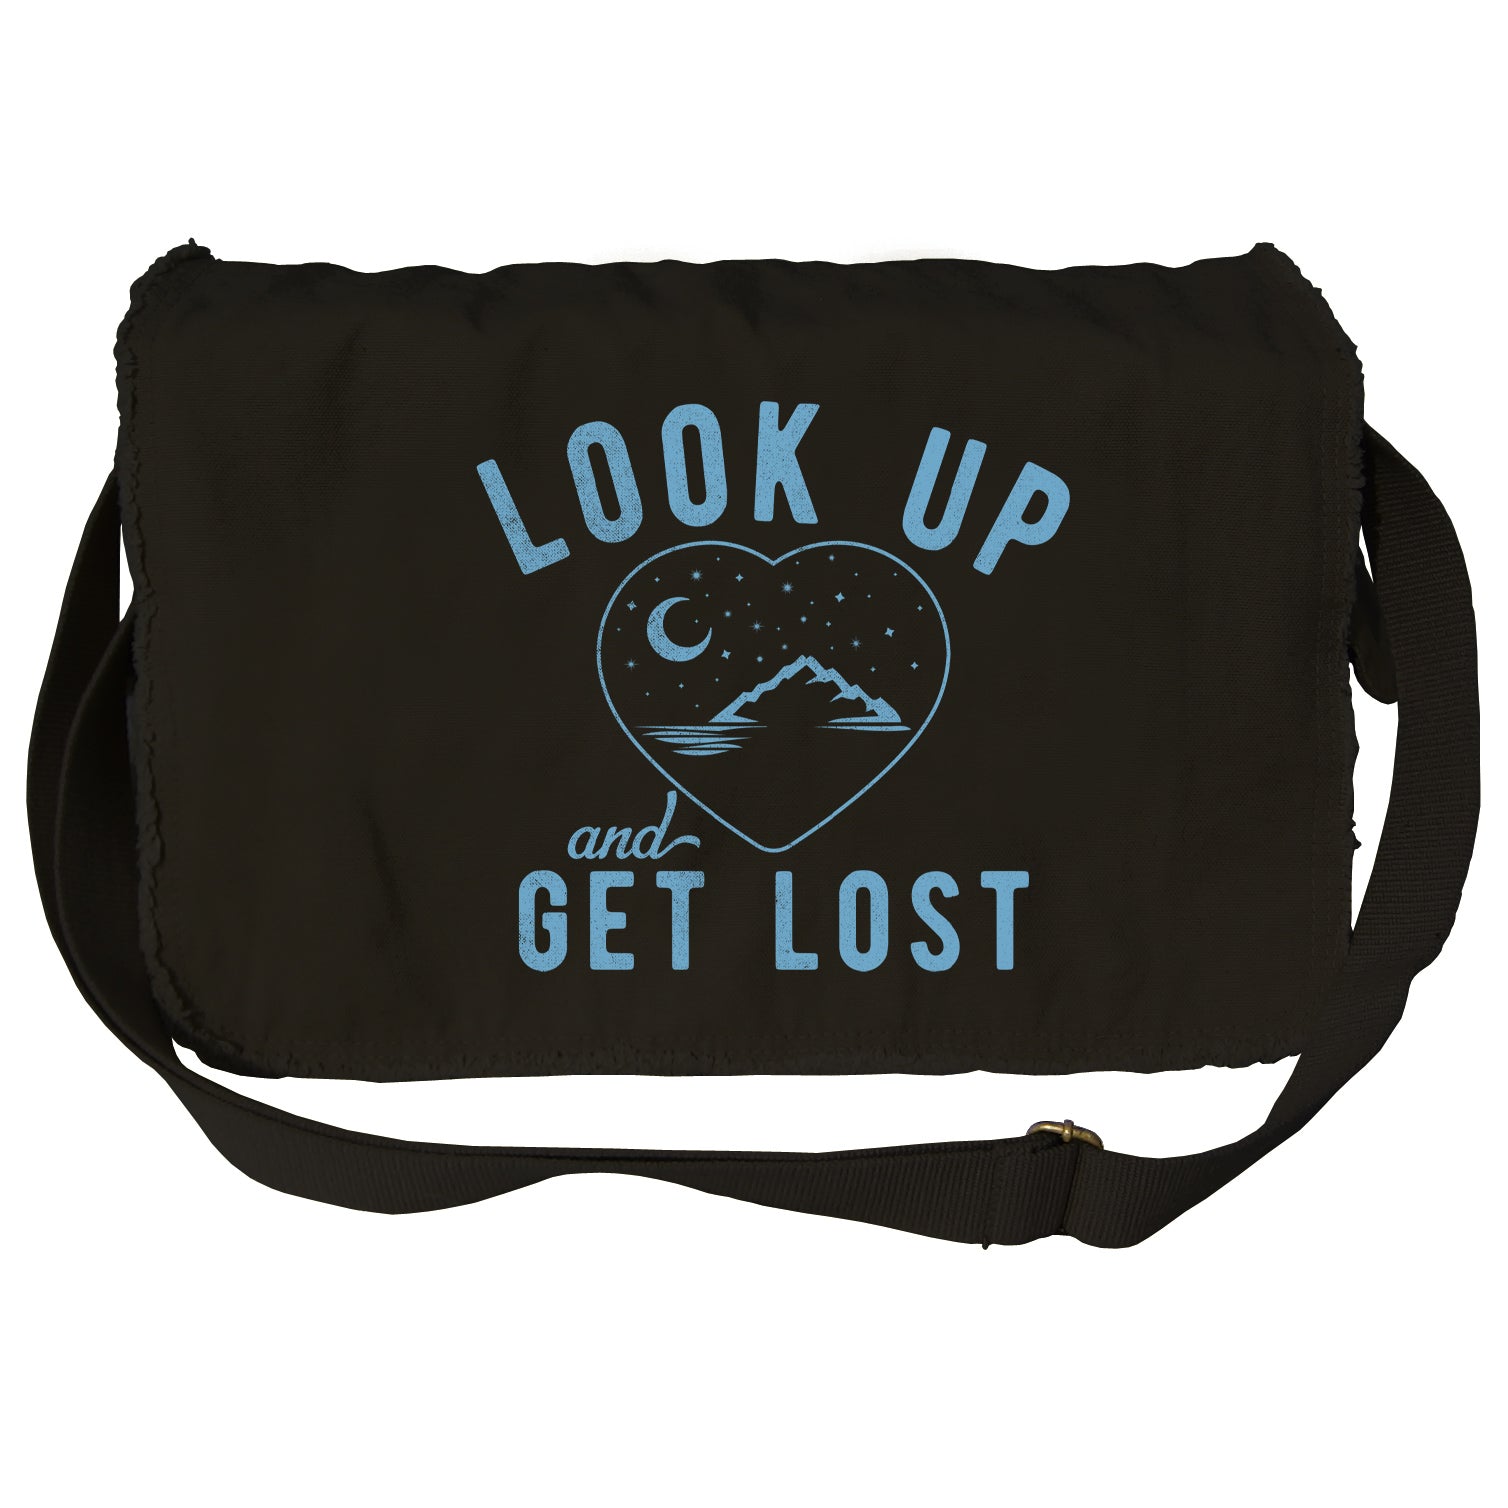 Look Up and Get Lost Messenger Bag